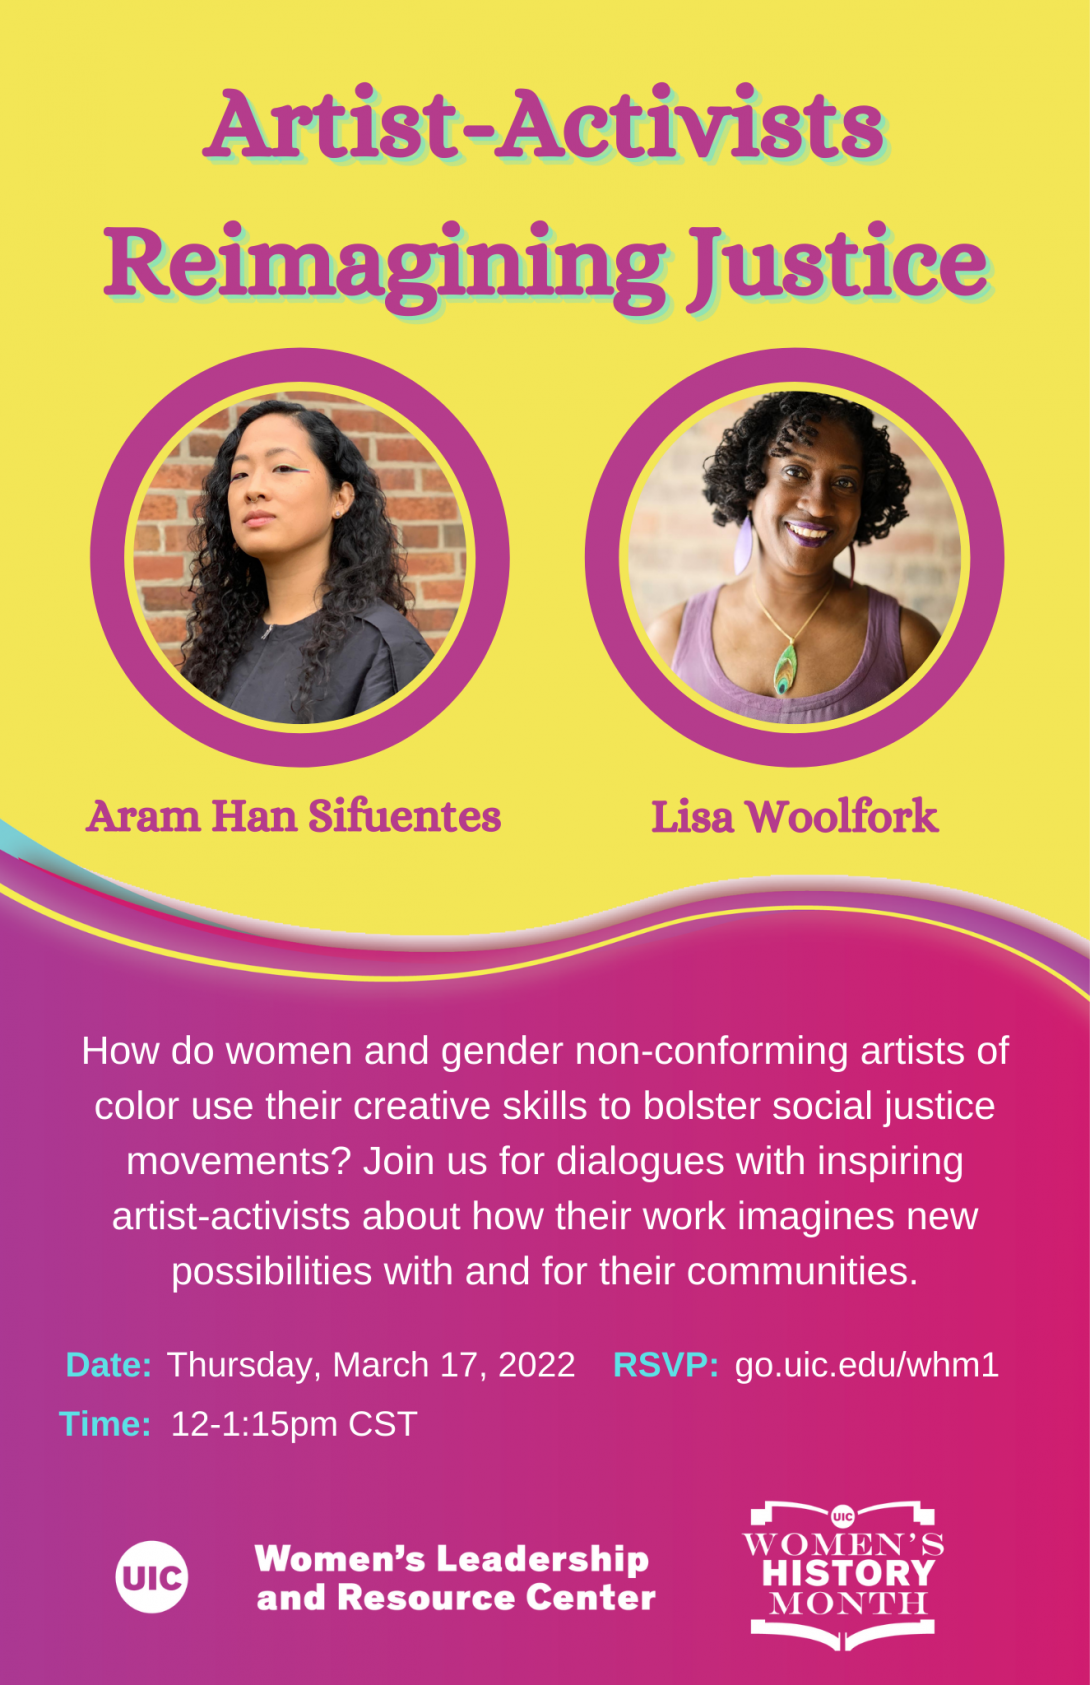 Headshots of Aram Han Sifuentes and Lisa Woolfork, on a yellow background. The event title appears in magenta text at the top. Below the speaker photos are the date, time, and RSVP link in white and blue text on a magenta background, and the WLRC logo.